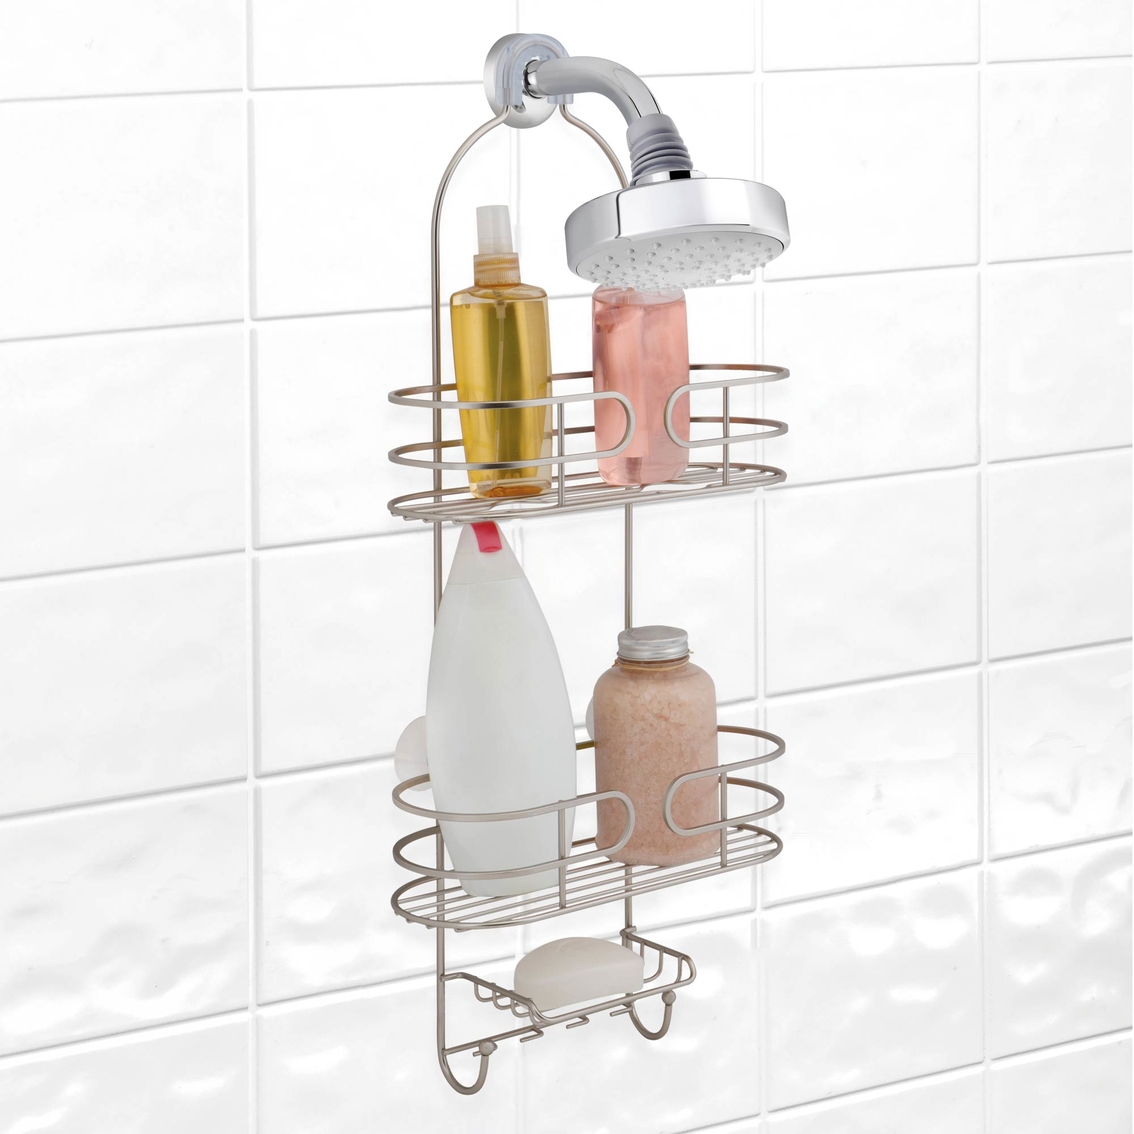 Bath Bliss Park Avenue Shower Caddy in Satin - Image 4 of 4